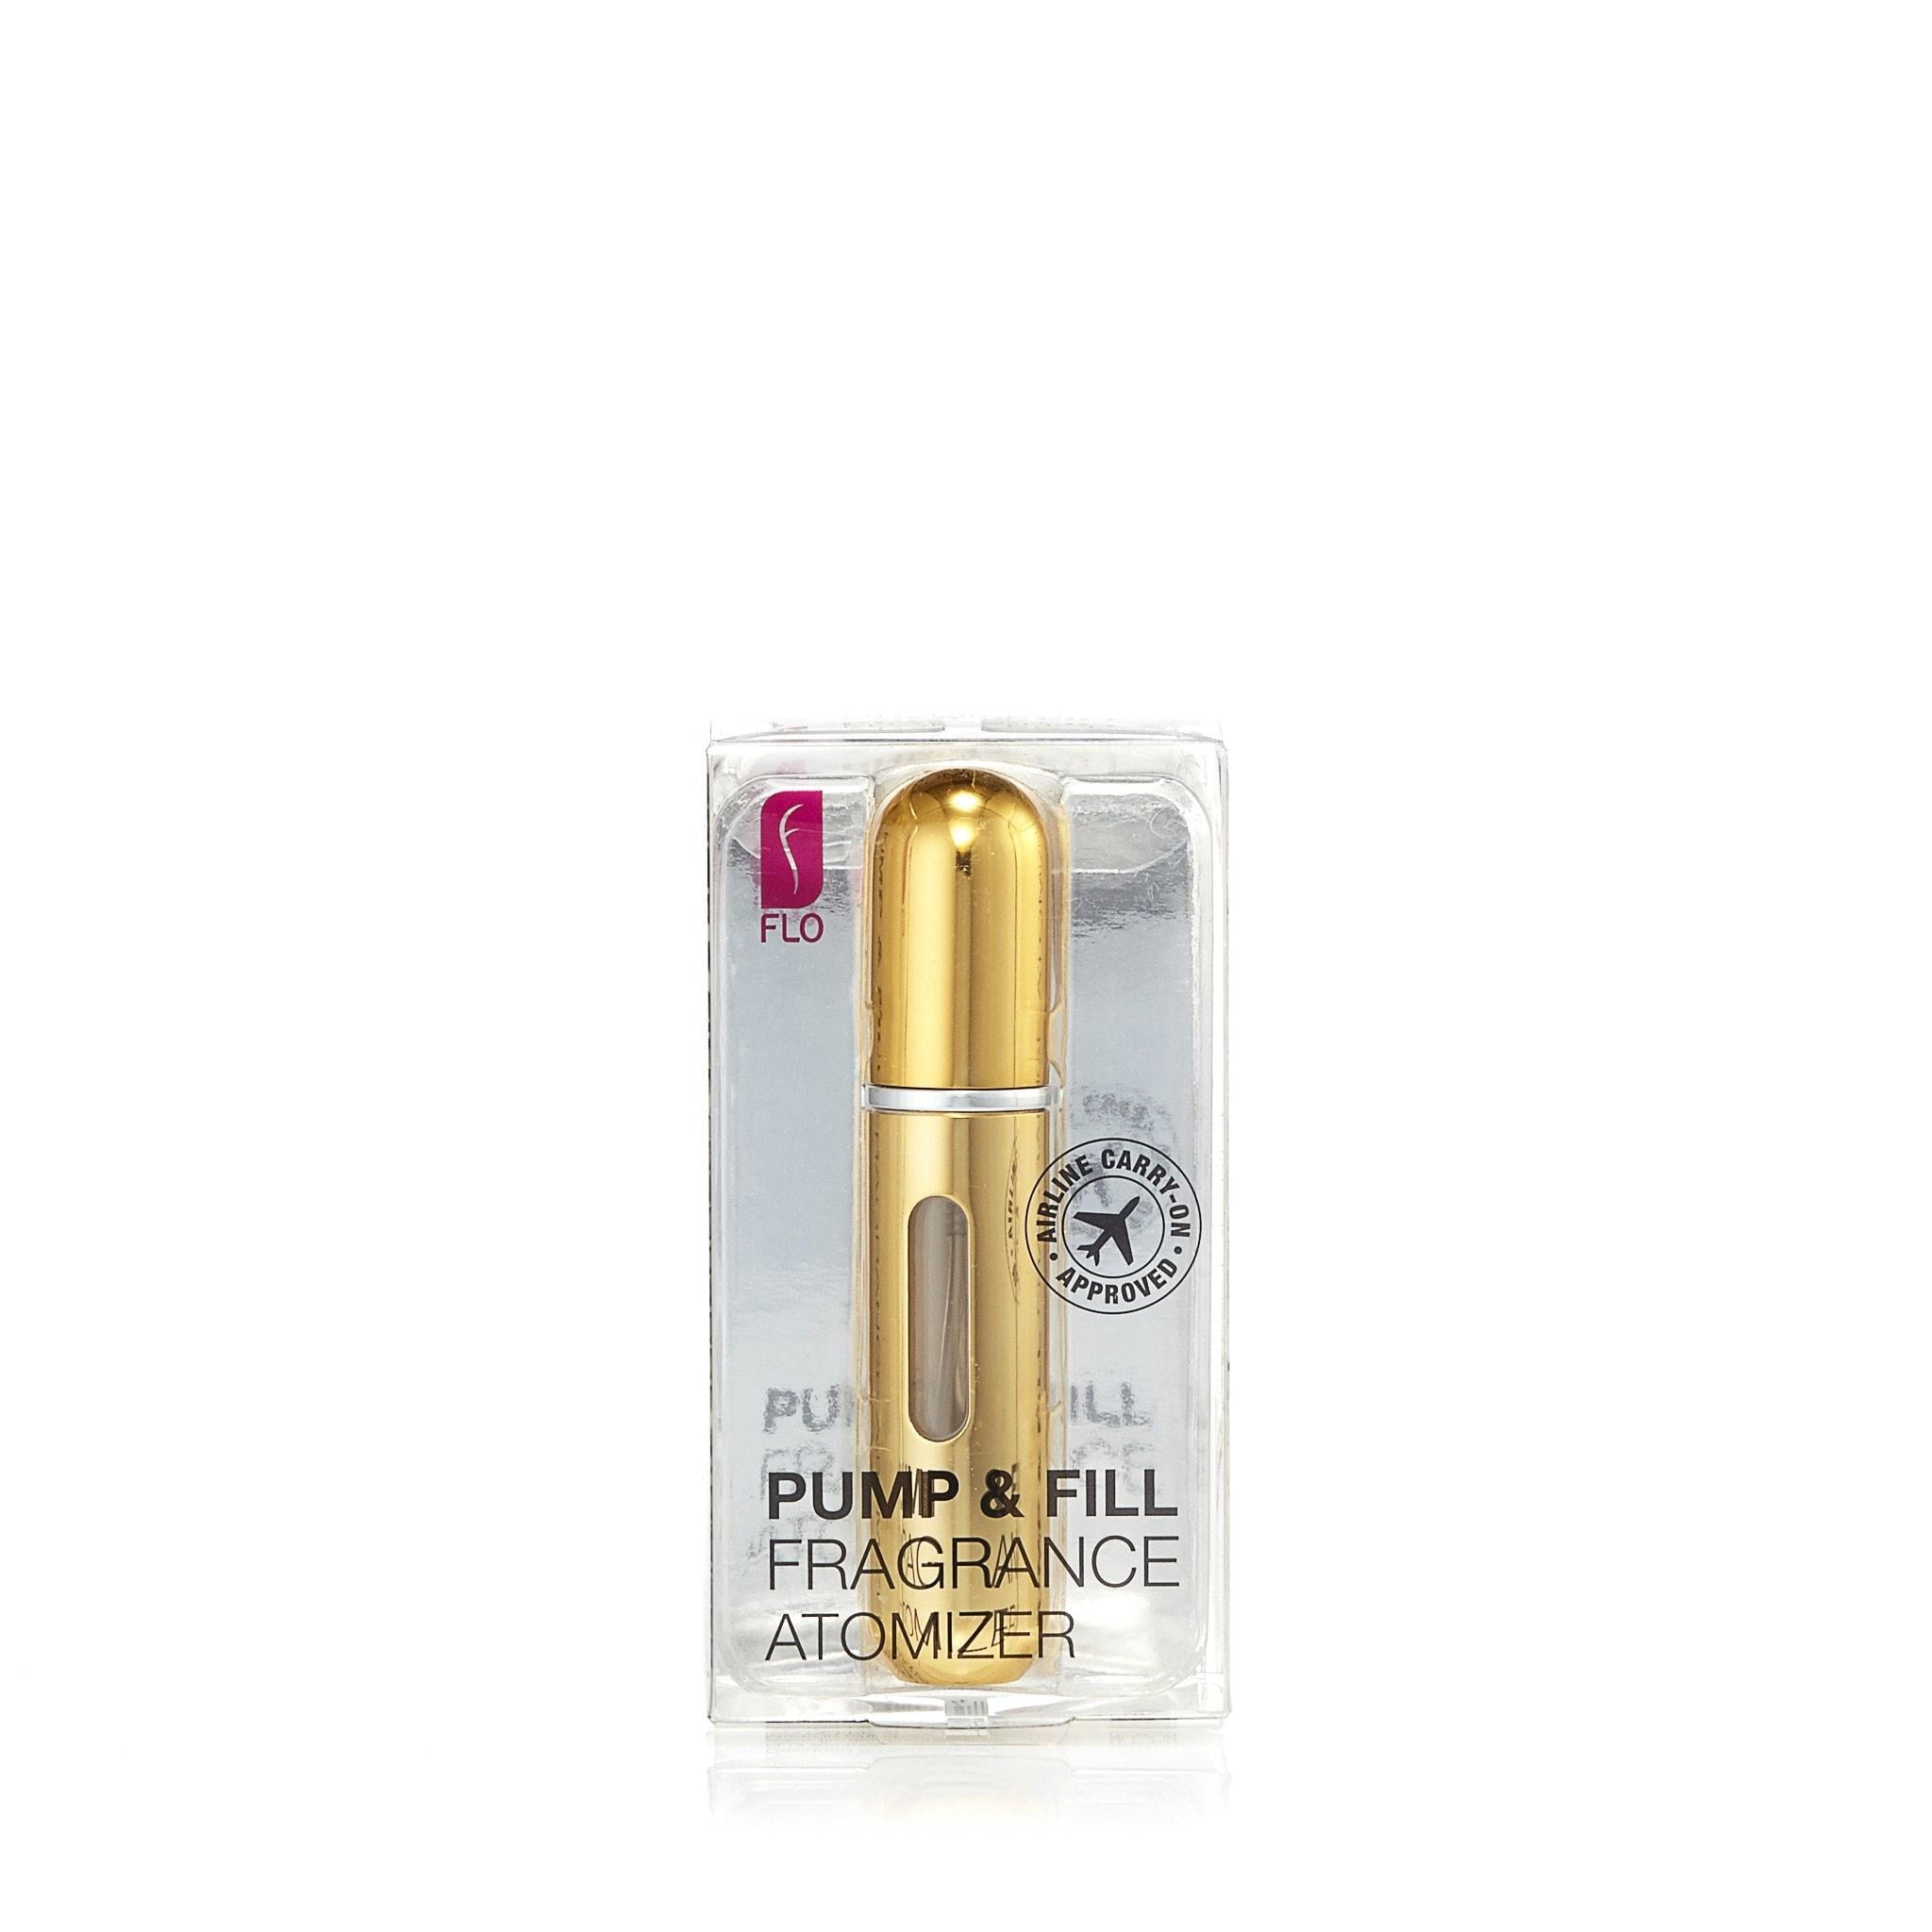 Pump and Fill Fragrance Atomizer by Perfumania Flo –